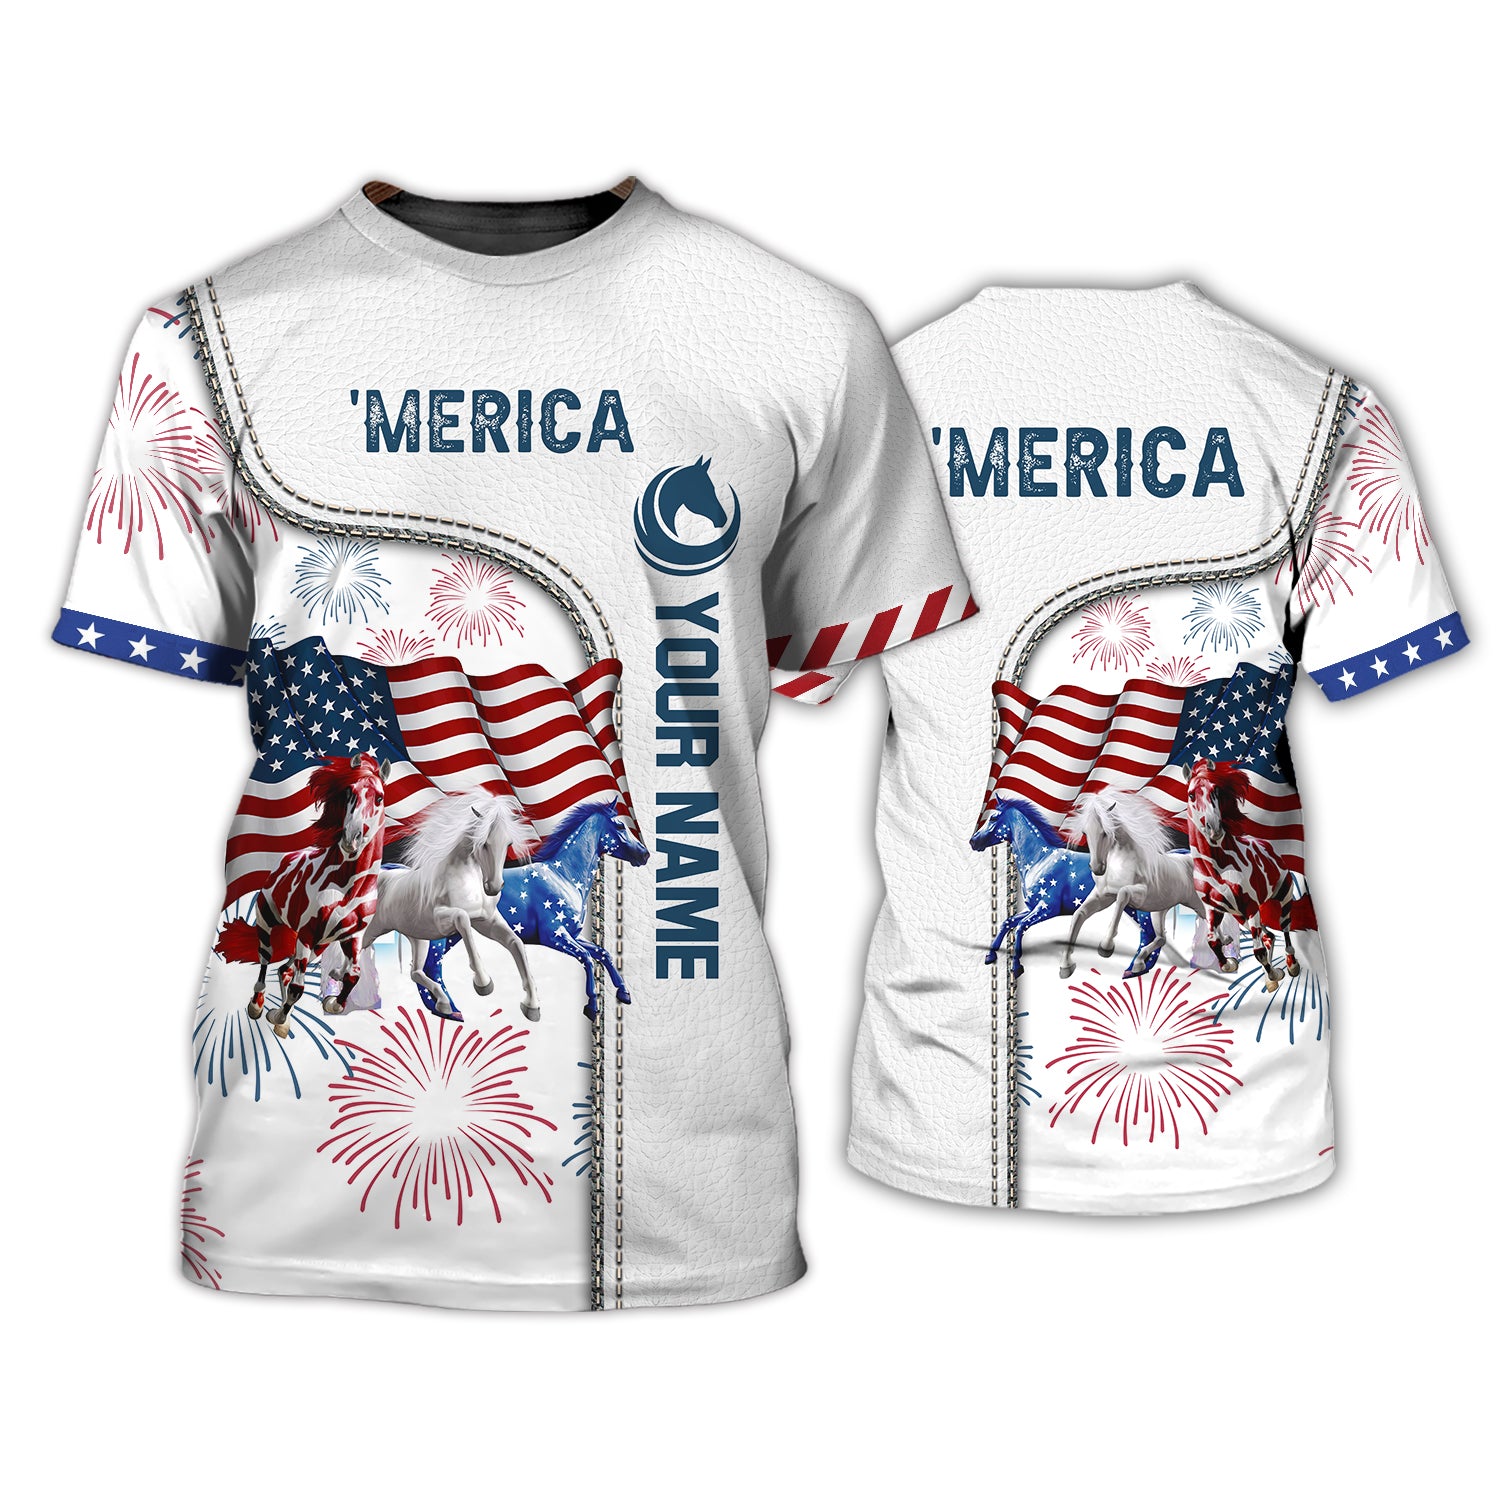 'Merica, Horse,  Personalized Name 3D Tshirt Hdmt